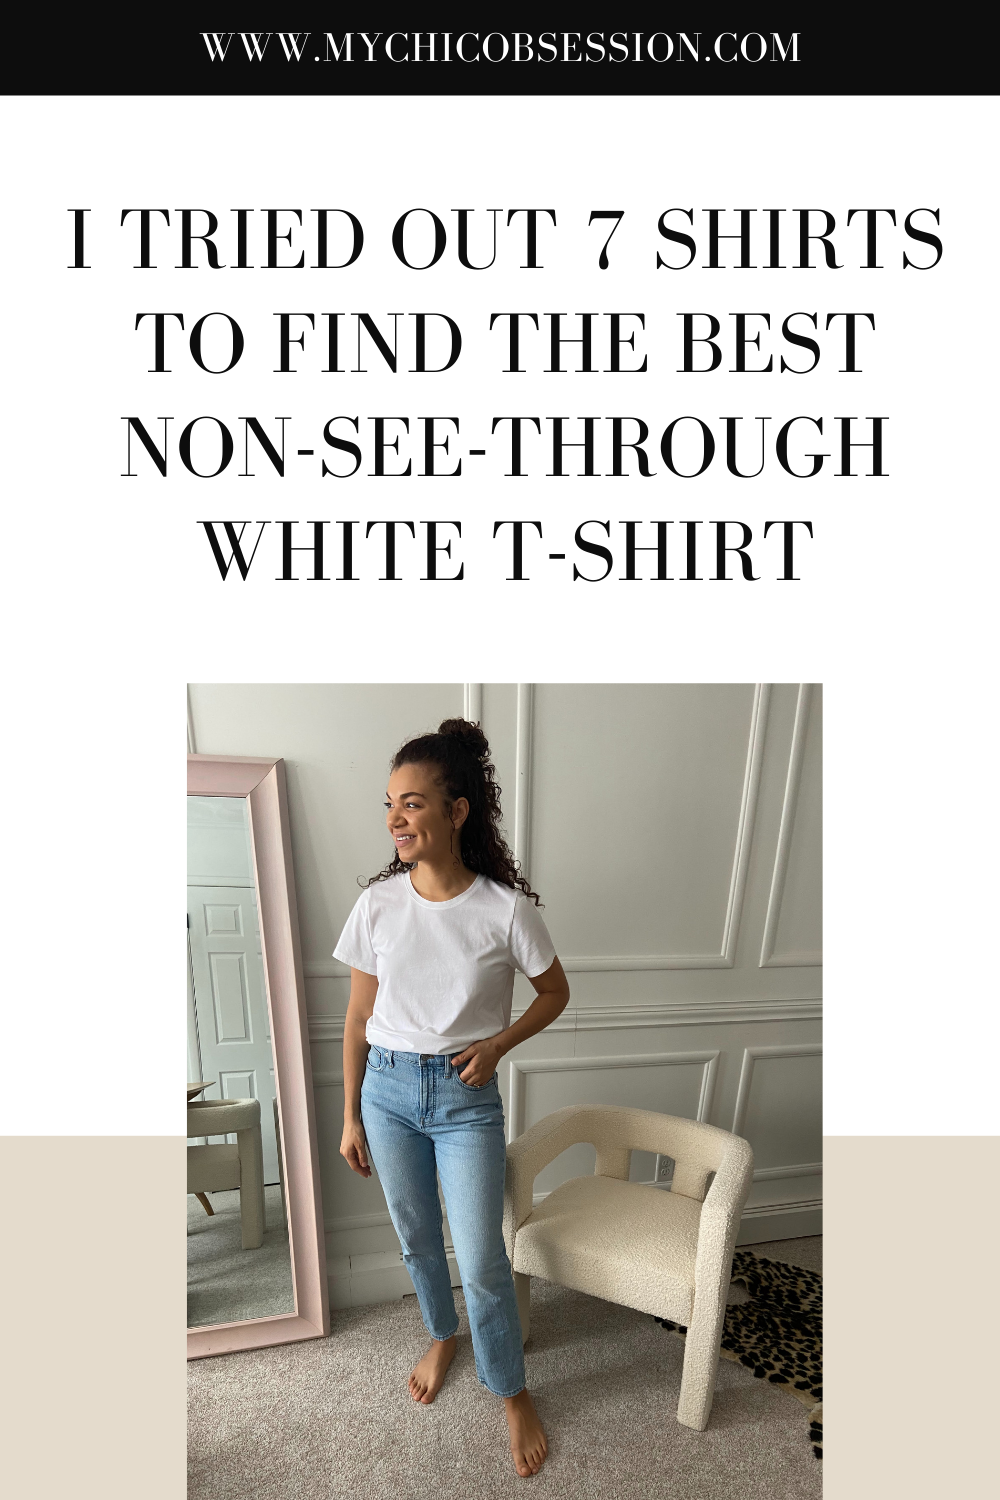 The Best Women’s Classic White T-shirts That Aren’t See-Through